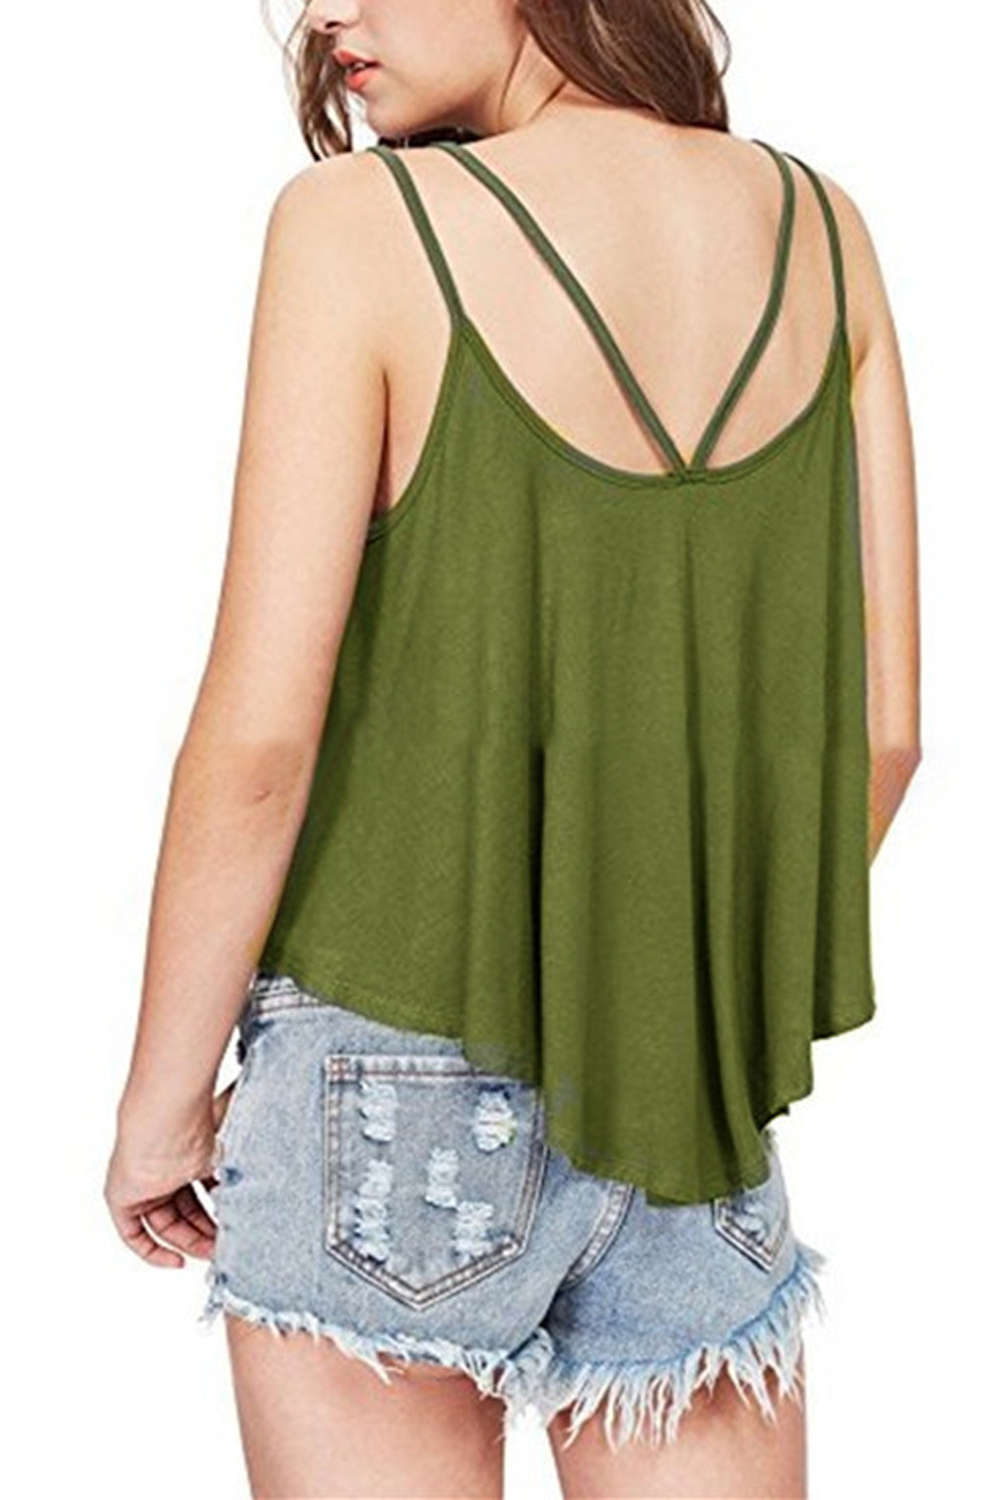 Iyasson Strap Swing Top Solid Casual Camis